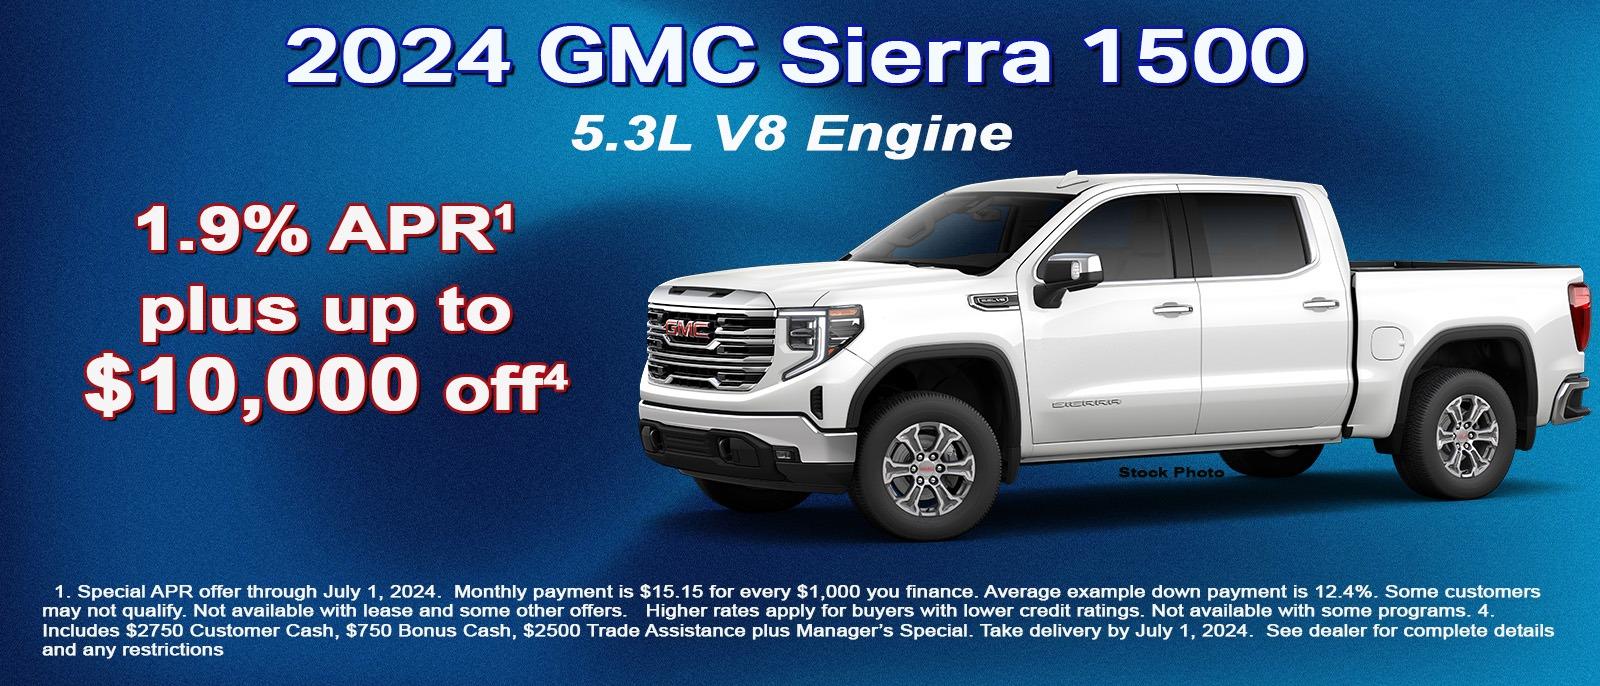 Save $10,000 on your new GMC Sierra